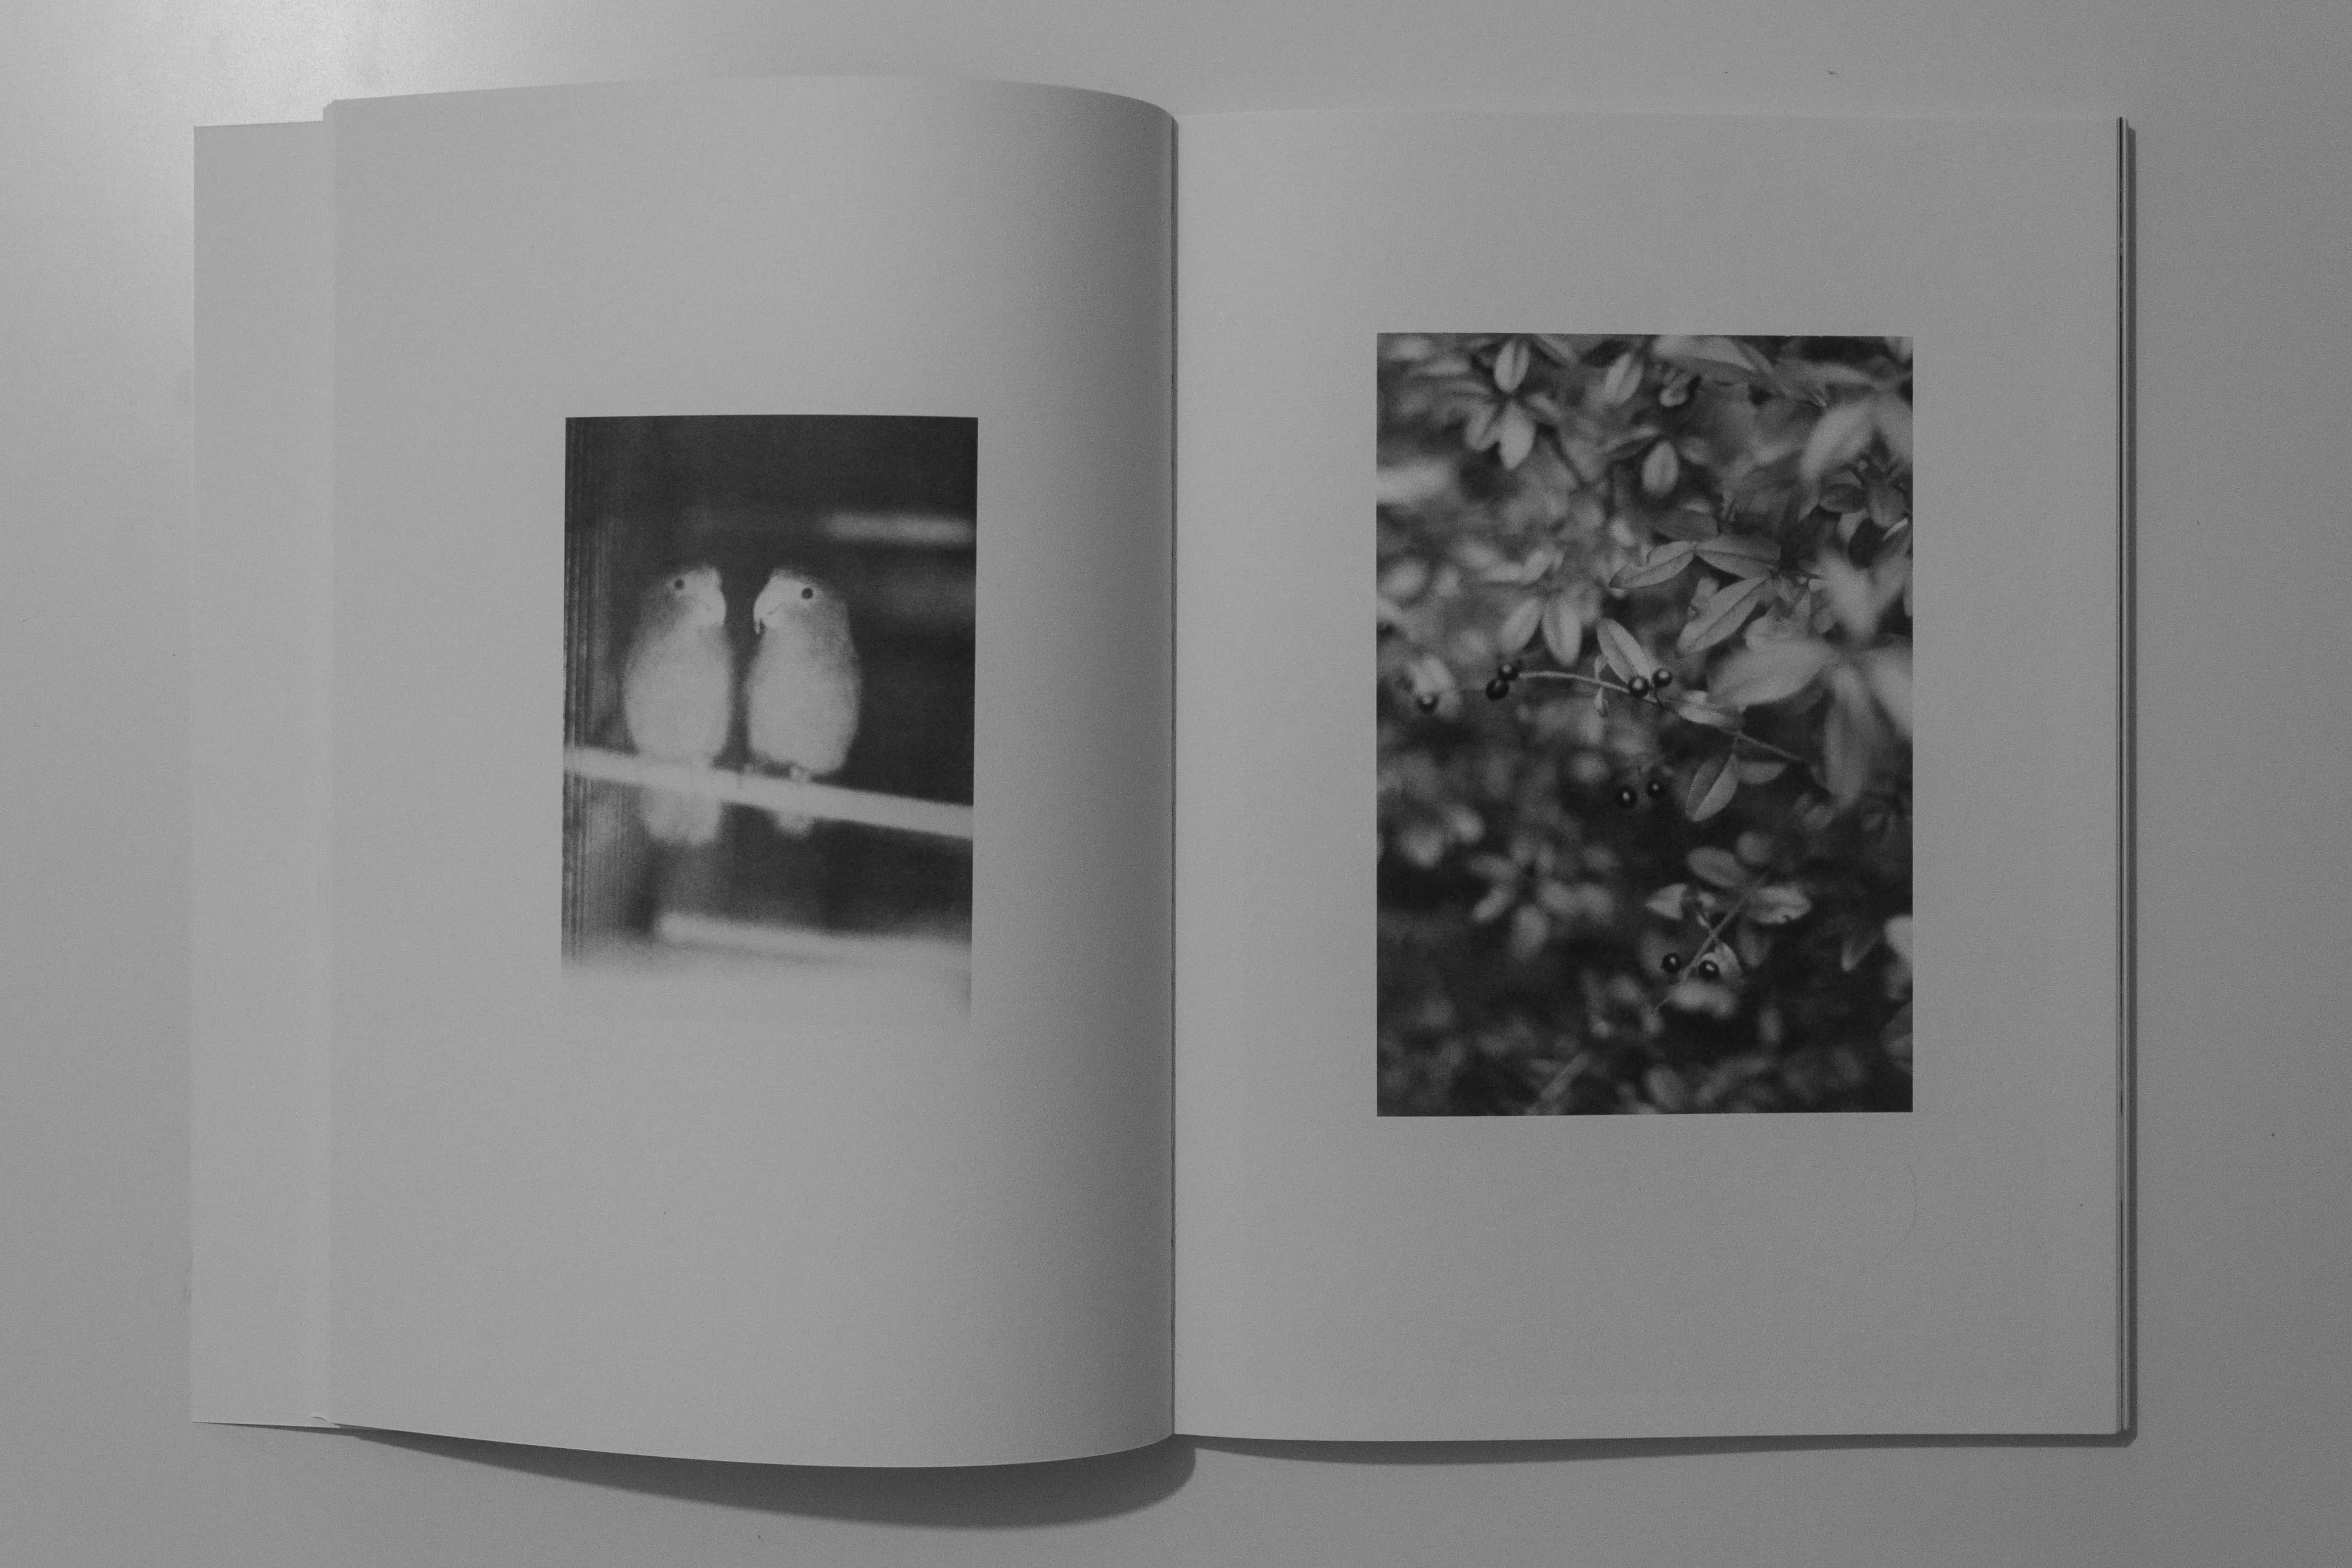 A Young Person Reviews Paare / Pairs by Jochen Lempert | The 